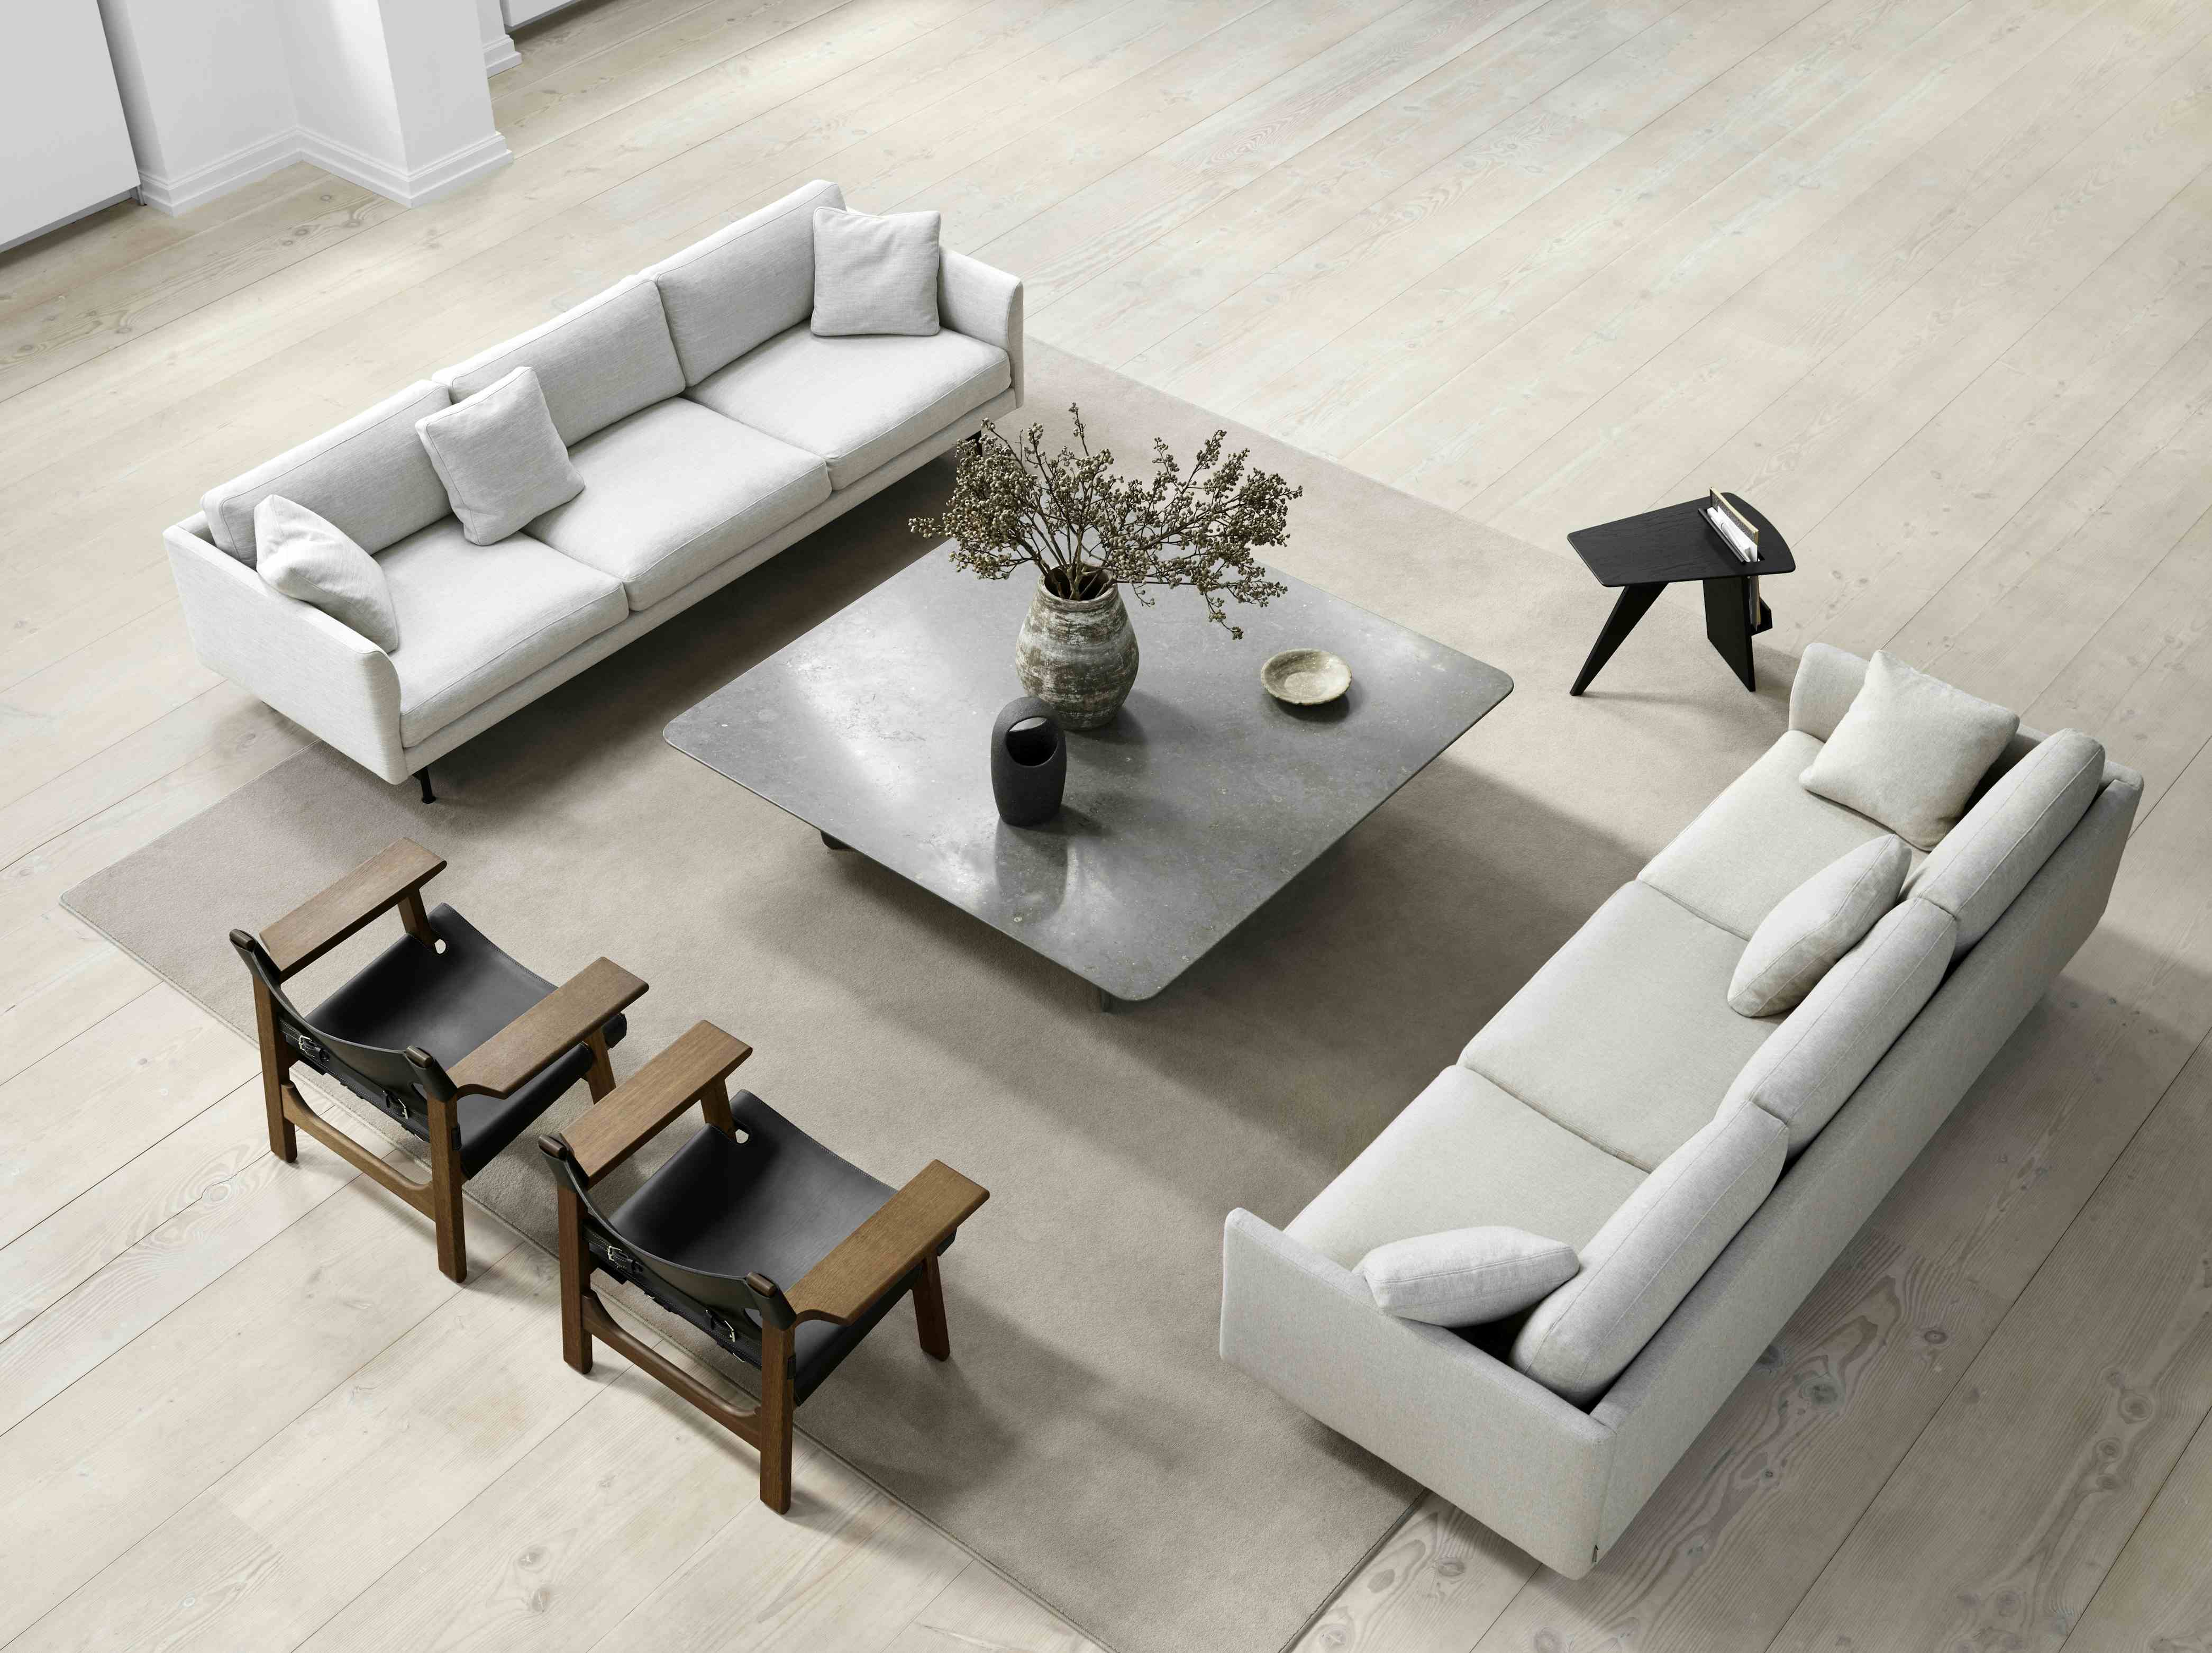 Tableau Coffee Table By Fredericia At Haute Living